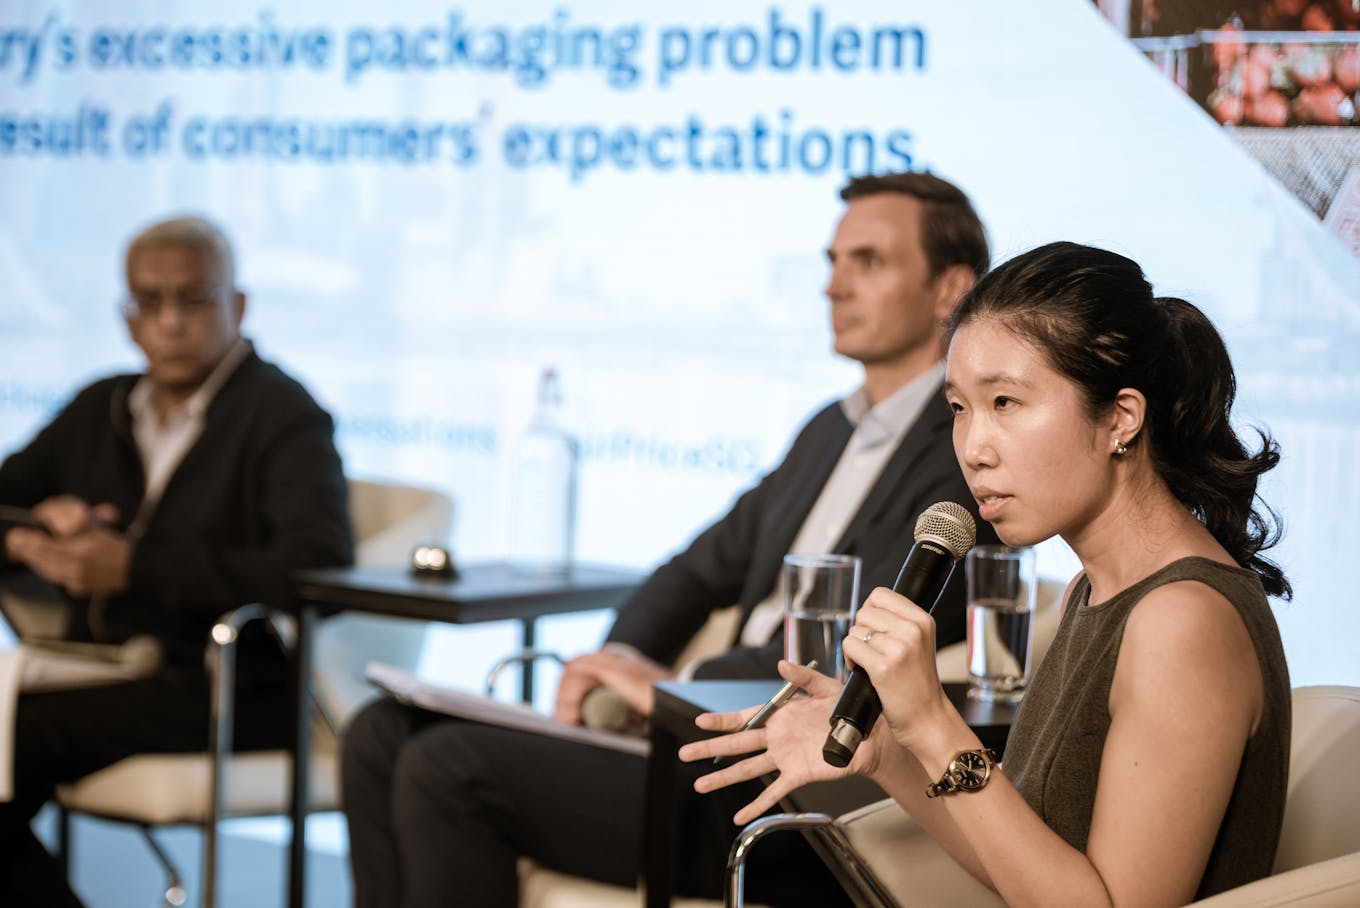 Hailin Pek makes her cases against the motion that consumer expectations are responsible for excessive packaging